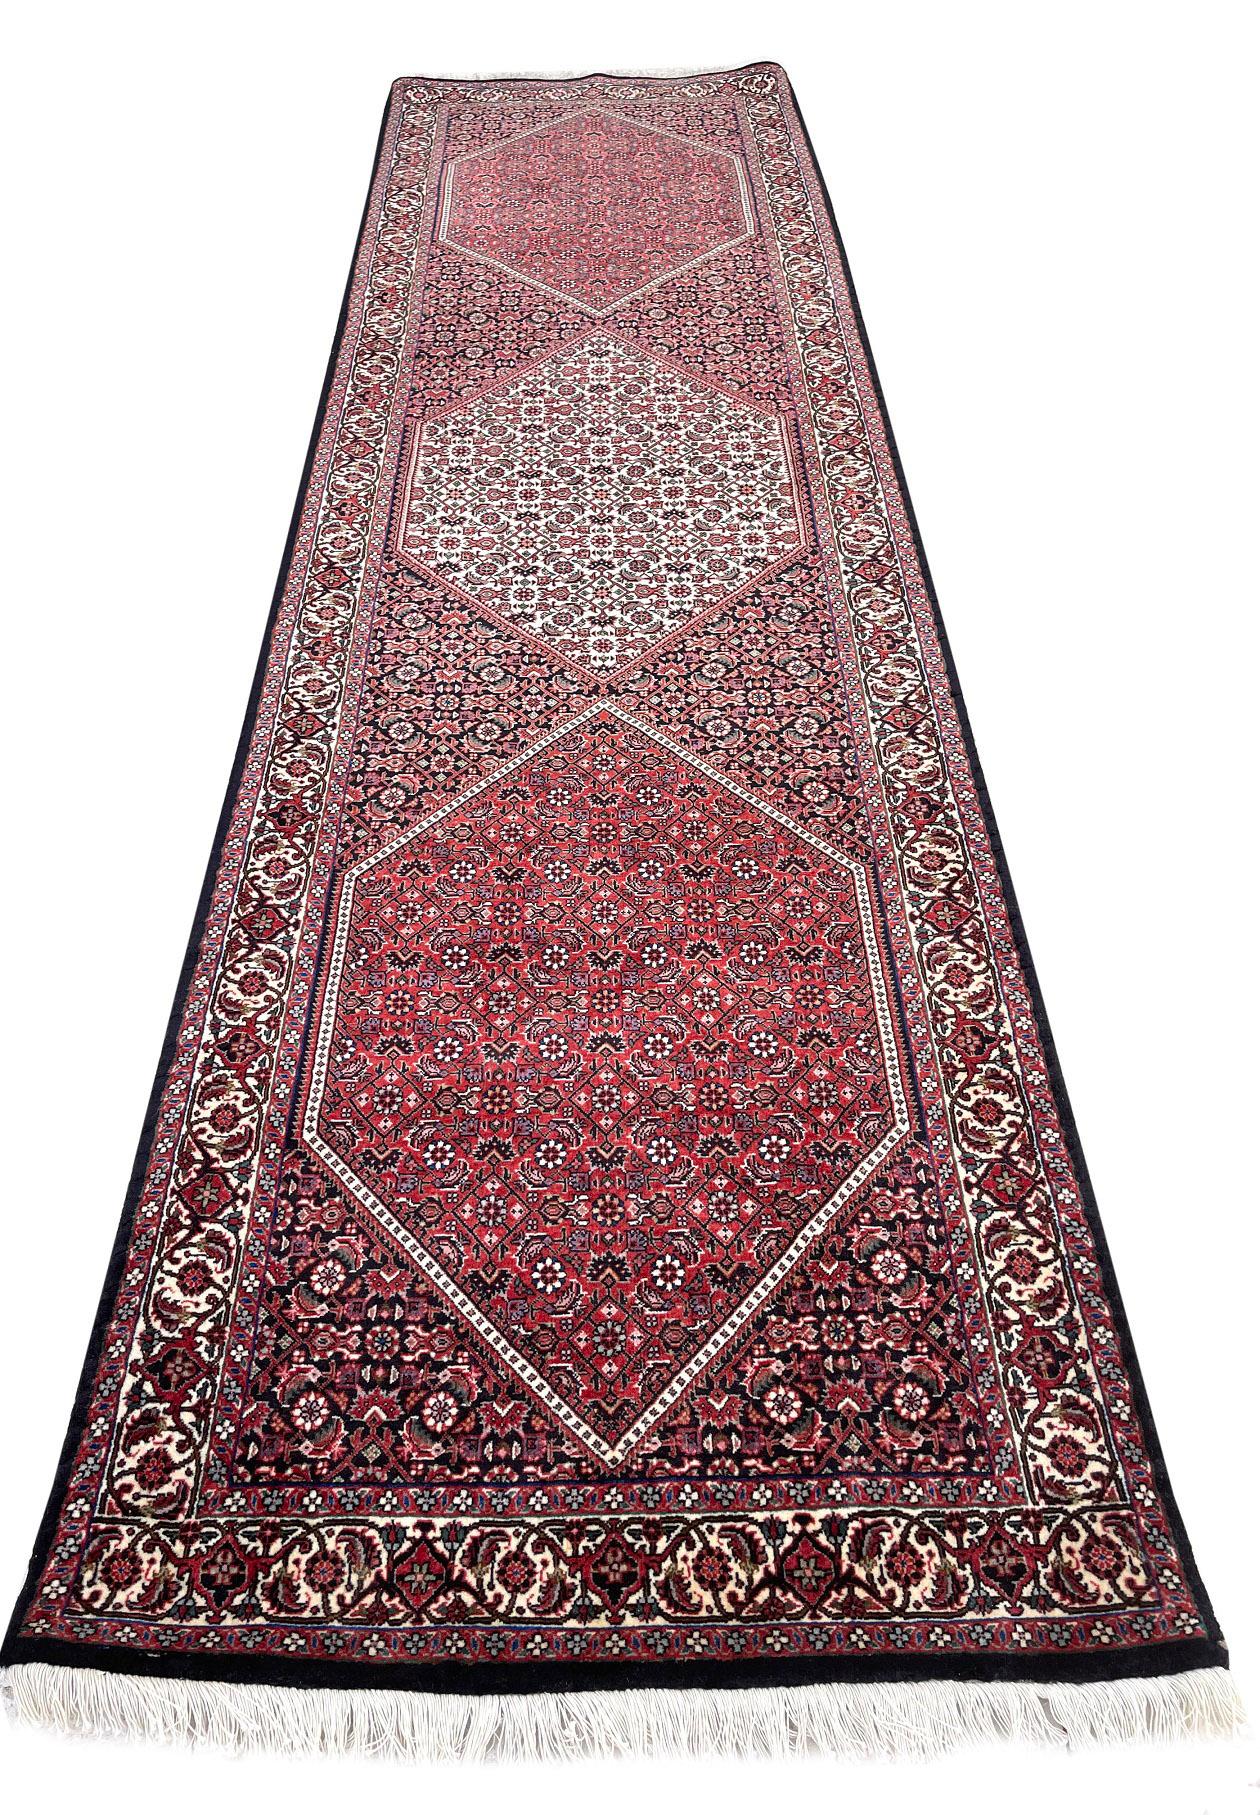 This Authentic beautiful Bijar runner has wool pile and cotton foundation with Herati fish design. It is made using high-quality wool, and the knots are beaten down using a heavy metal comb to give a tight, dirt-resistant pile. This stunning Persian